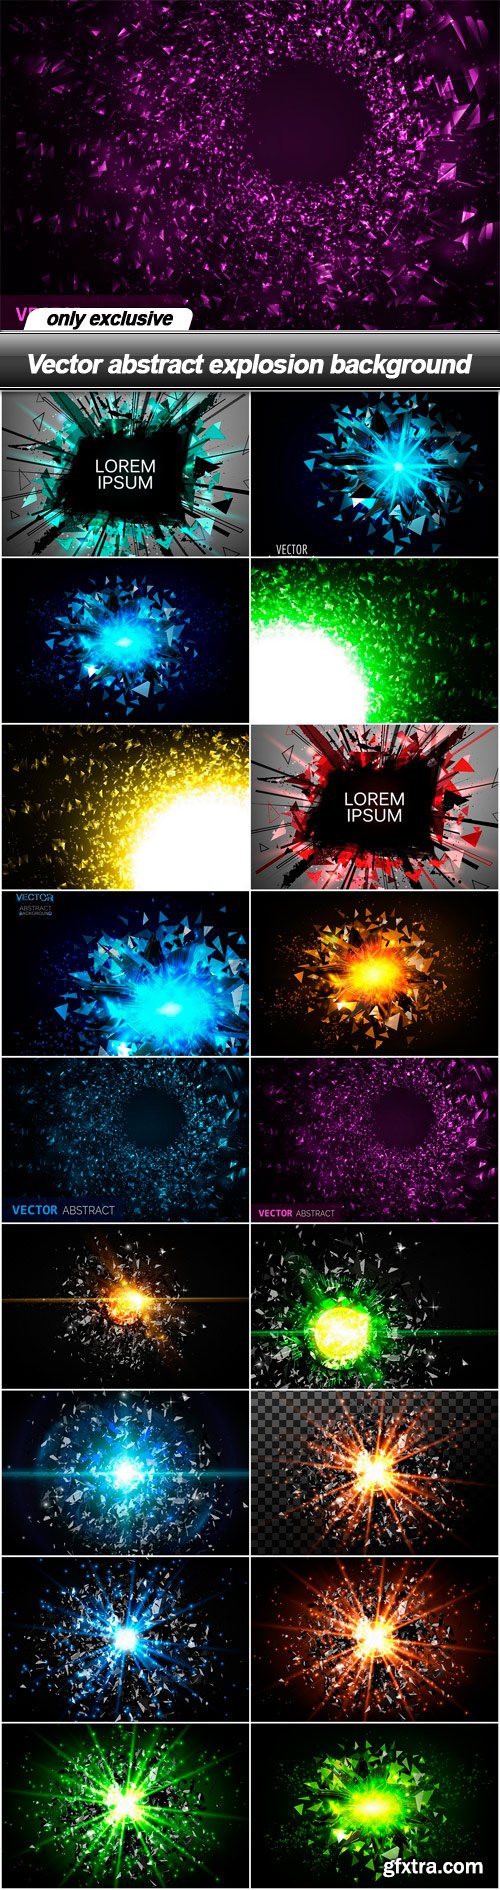 Vector abstract explosion background - 18 EPS